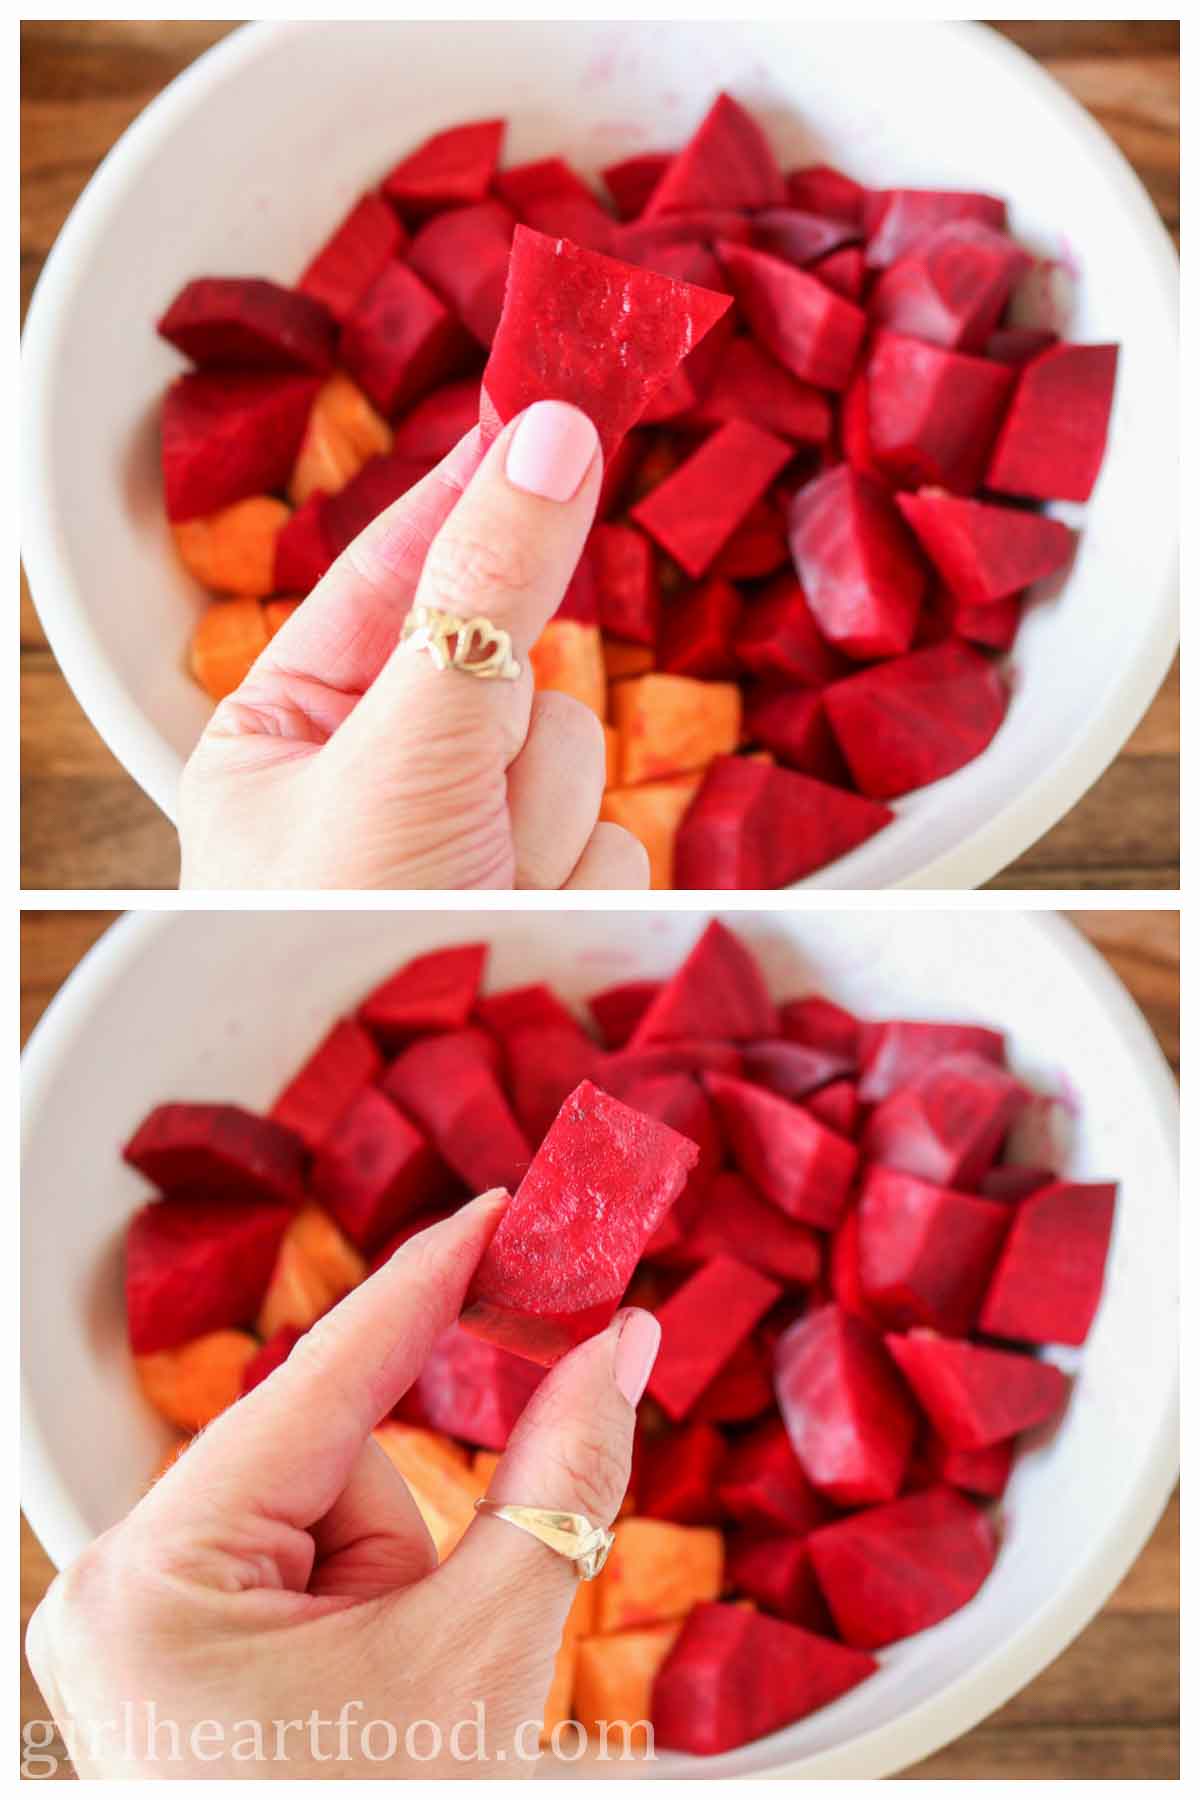 Collage of a hand holding a chunk of beet to show the size.